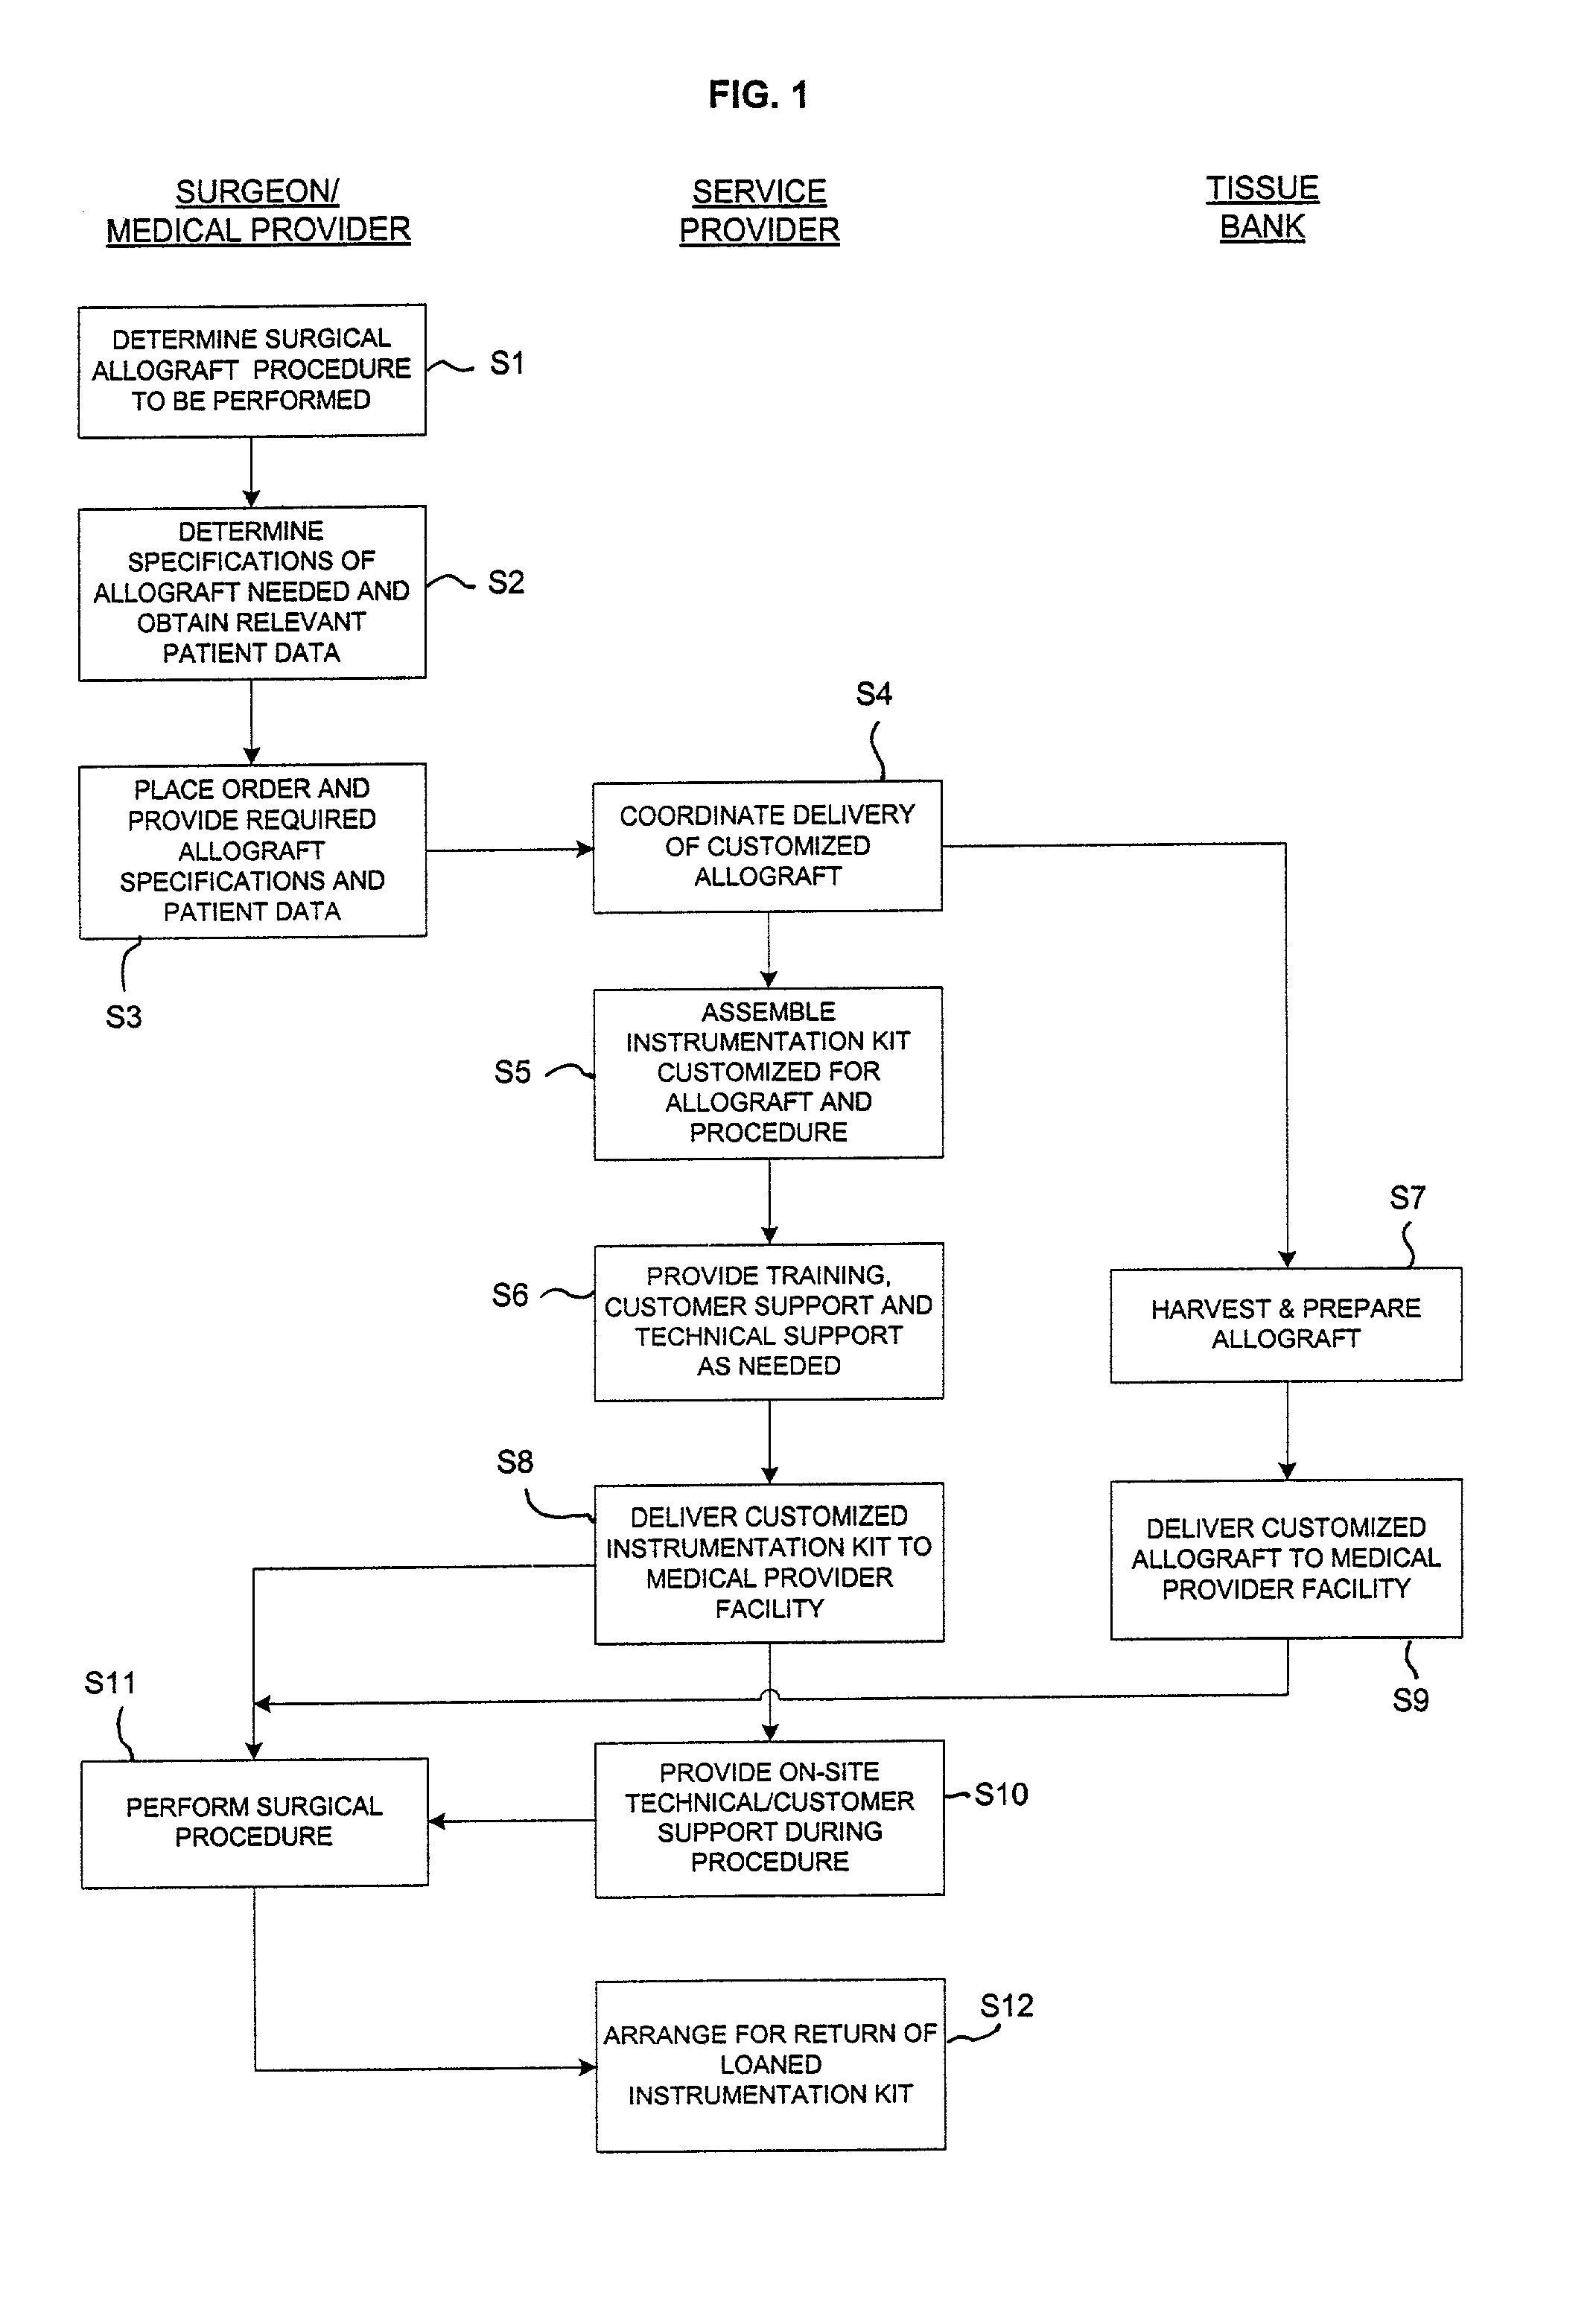 Method of selling procedure specific allografts and associated instrumentation